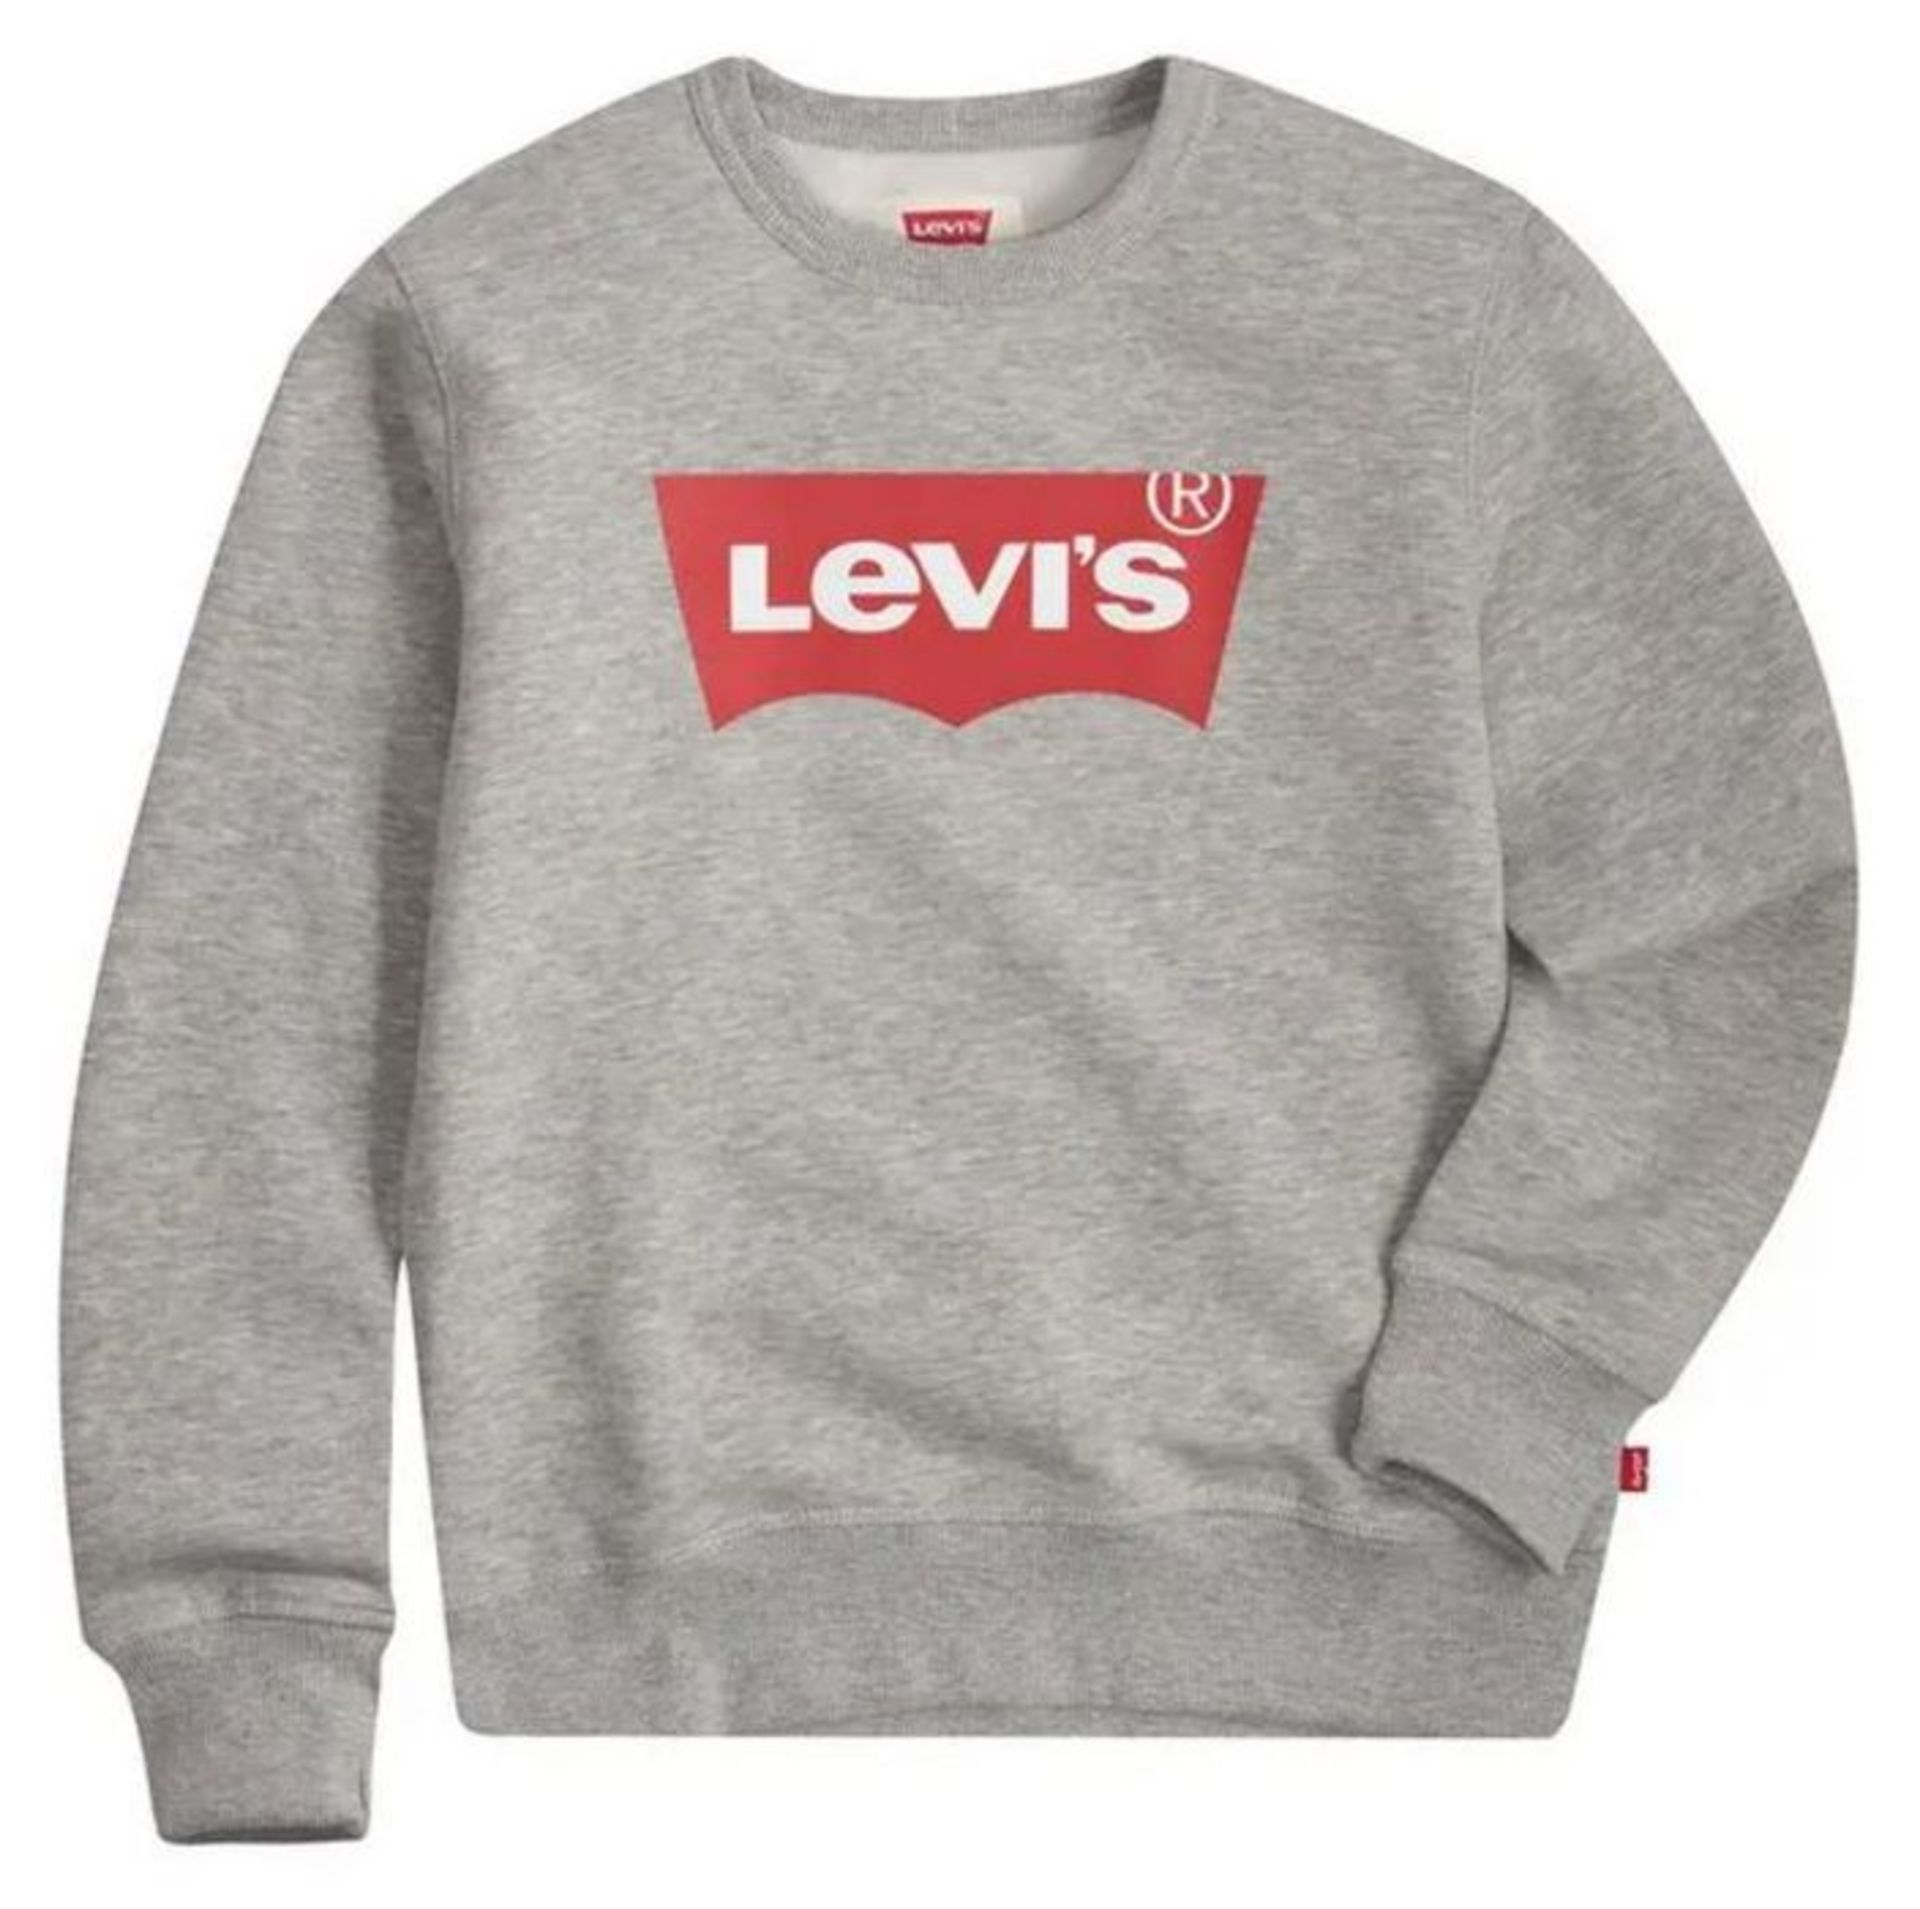 1 X BOYS LEVI'S COTTON MIX SWEATSHIRT IN 16 YEARS / GREY HEATHER / RRP £32.99 / AS NEW WITH TAGS